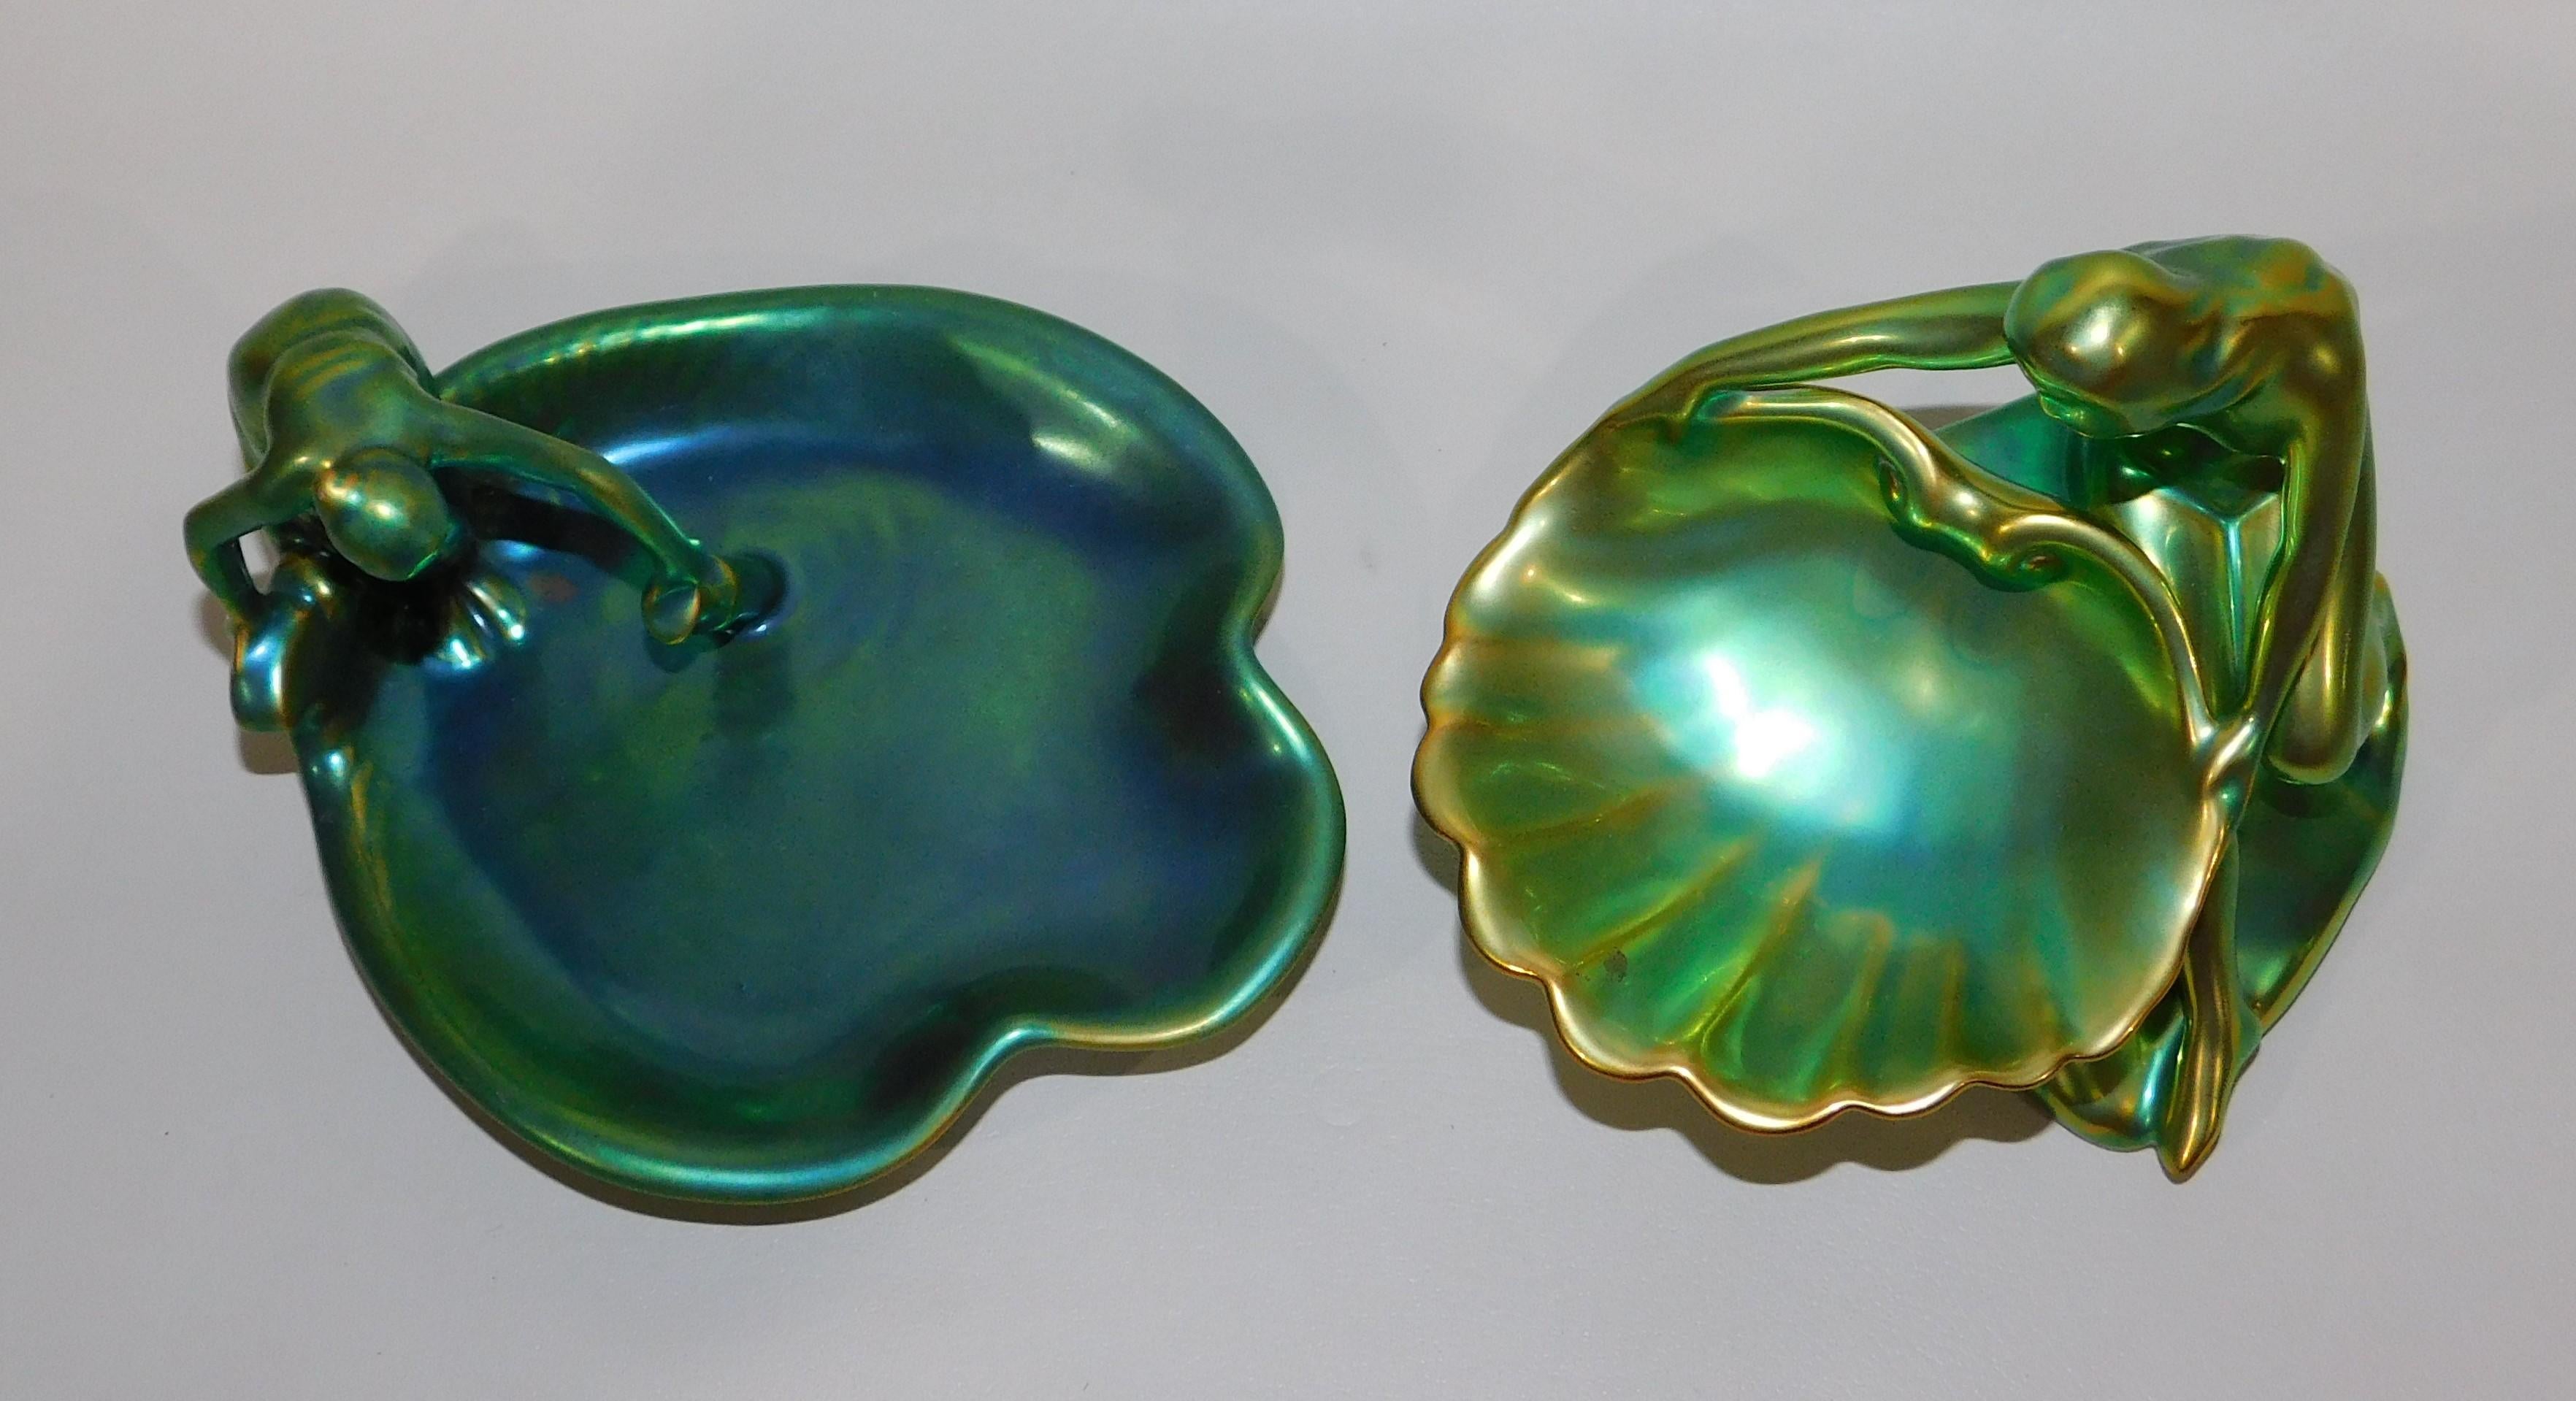 Pair of Zsolnay Decorative Ceramic Figurative Dishes with Eosin Glaze For Sale 1